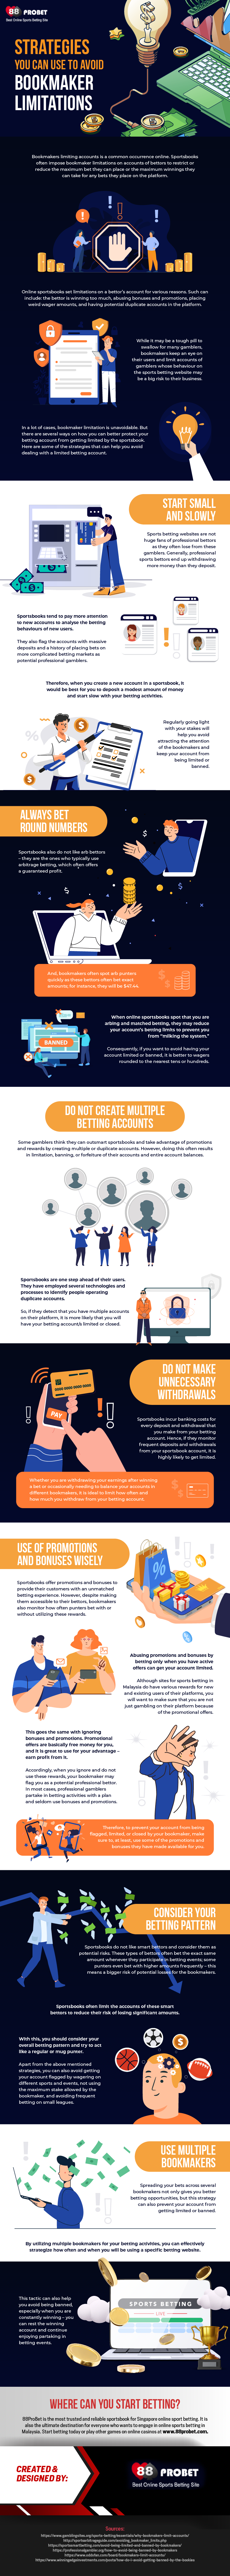 Strategies-You-Can-Use-to-Avoid-Bookmaker-Limitations-Infographic